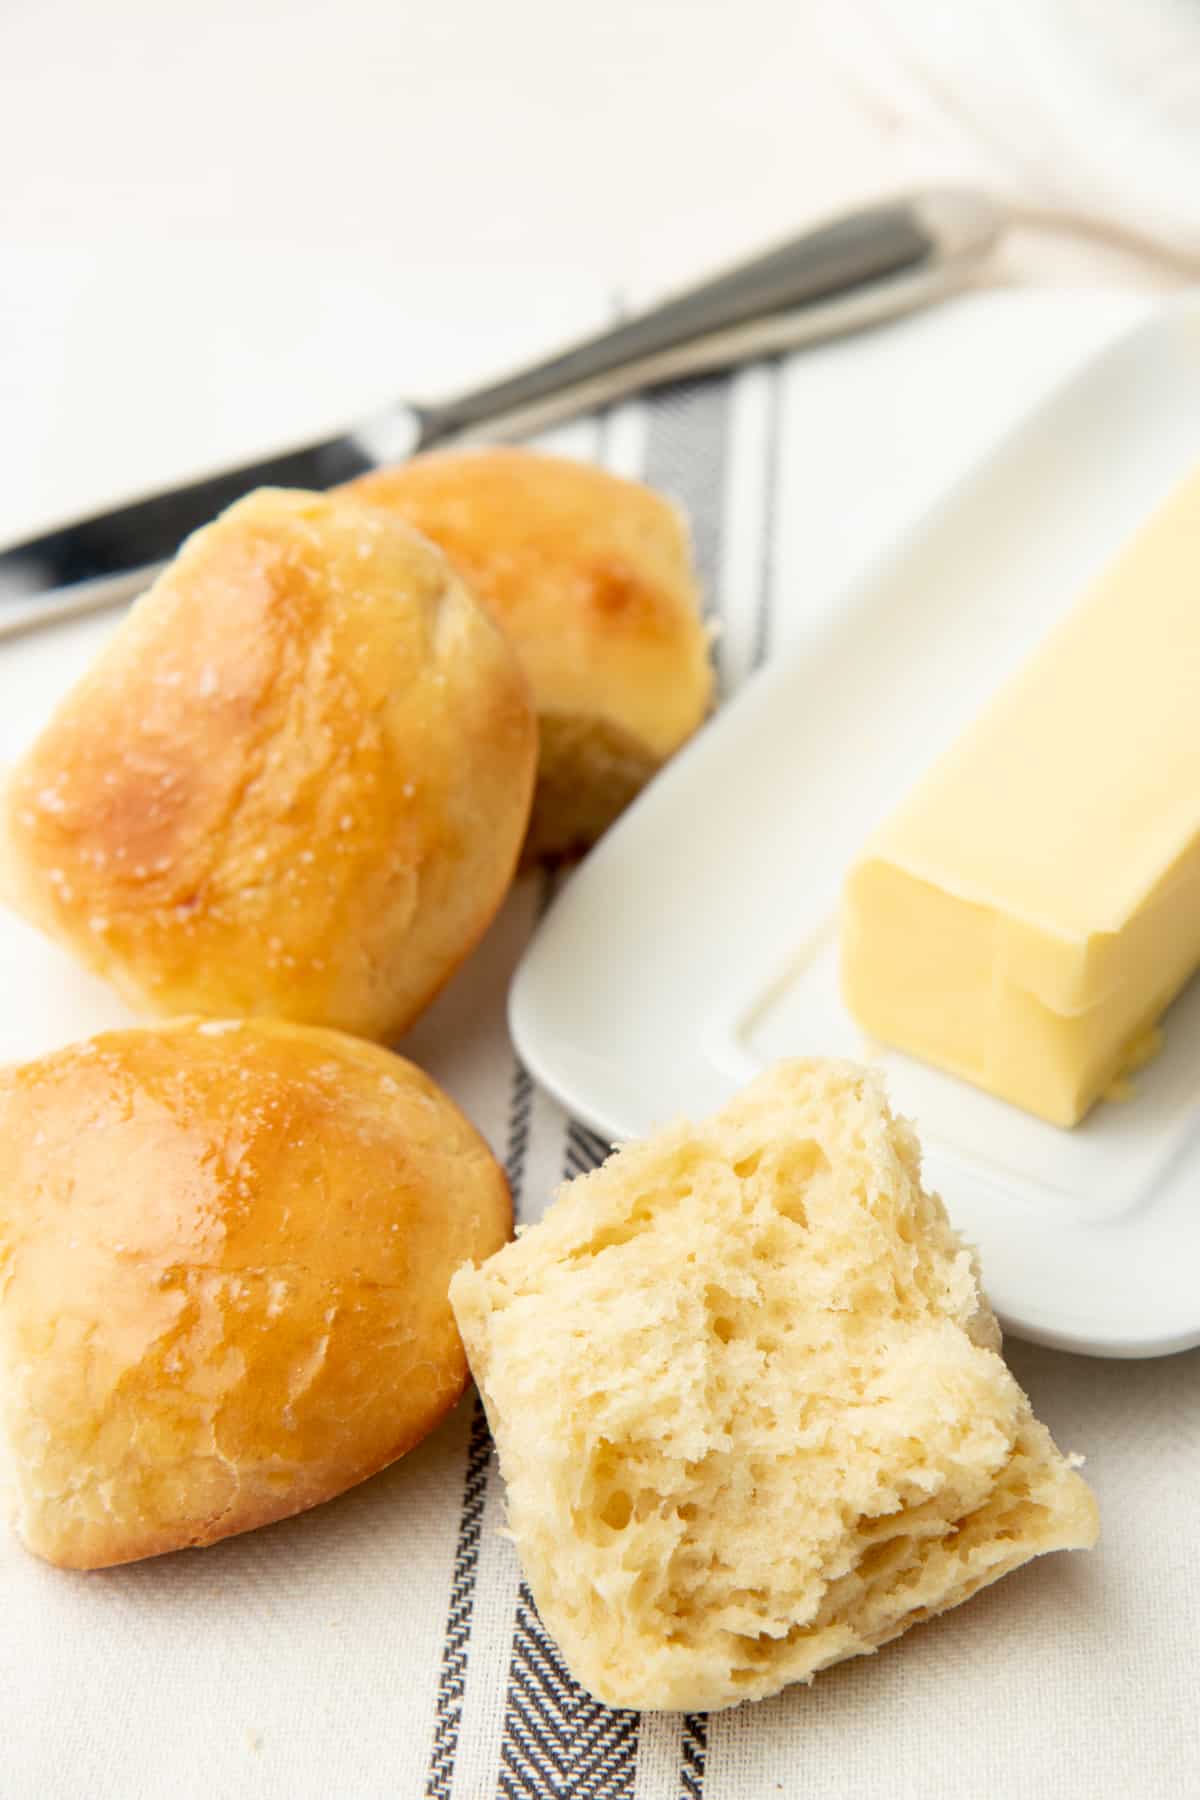 A cut roll sits next to whole rolls and a dish of butter.